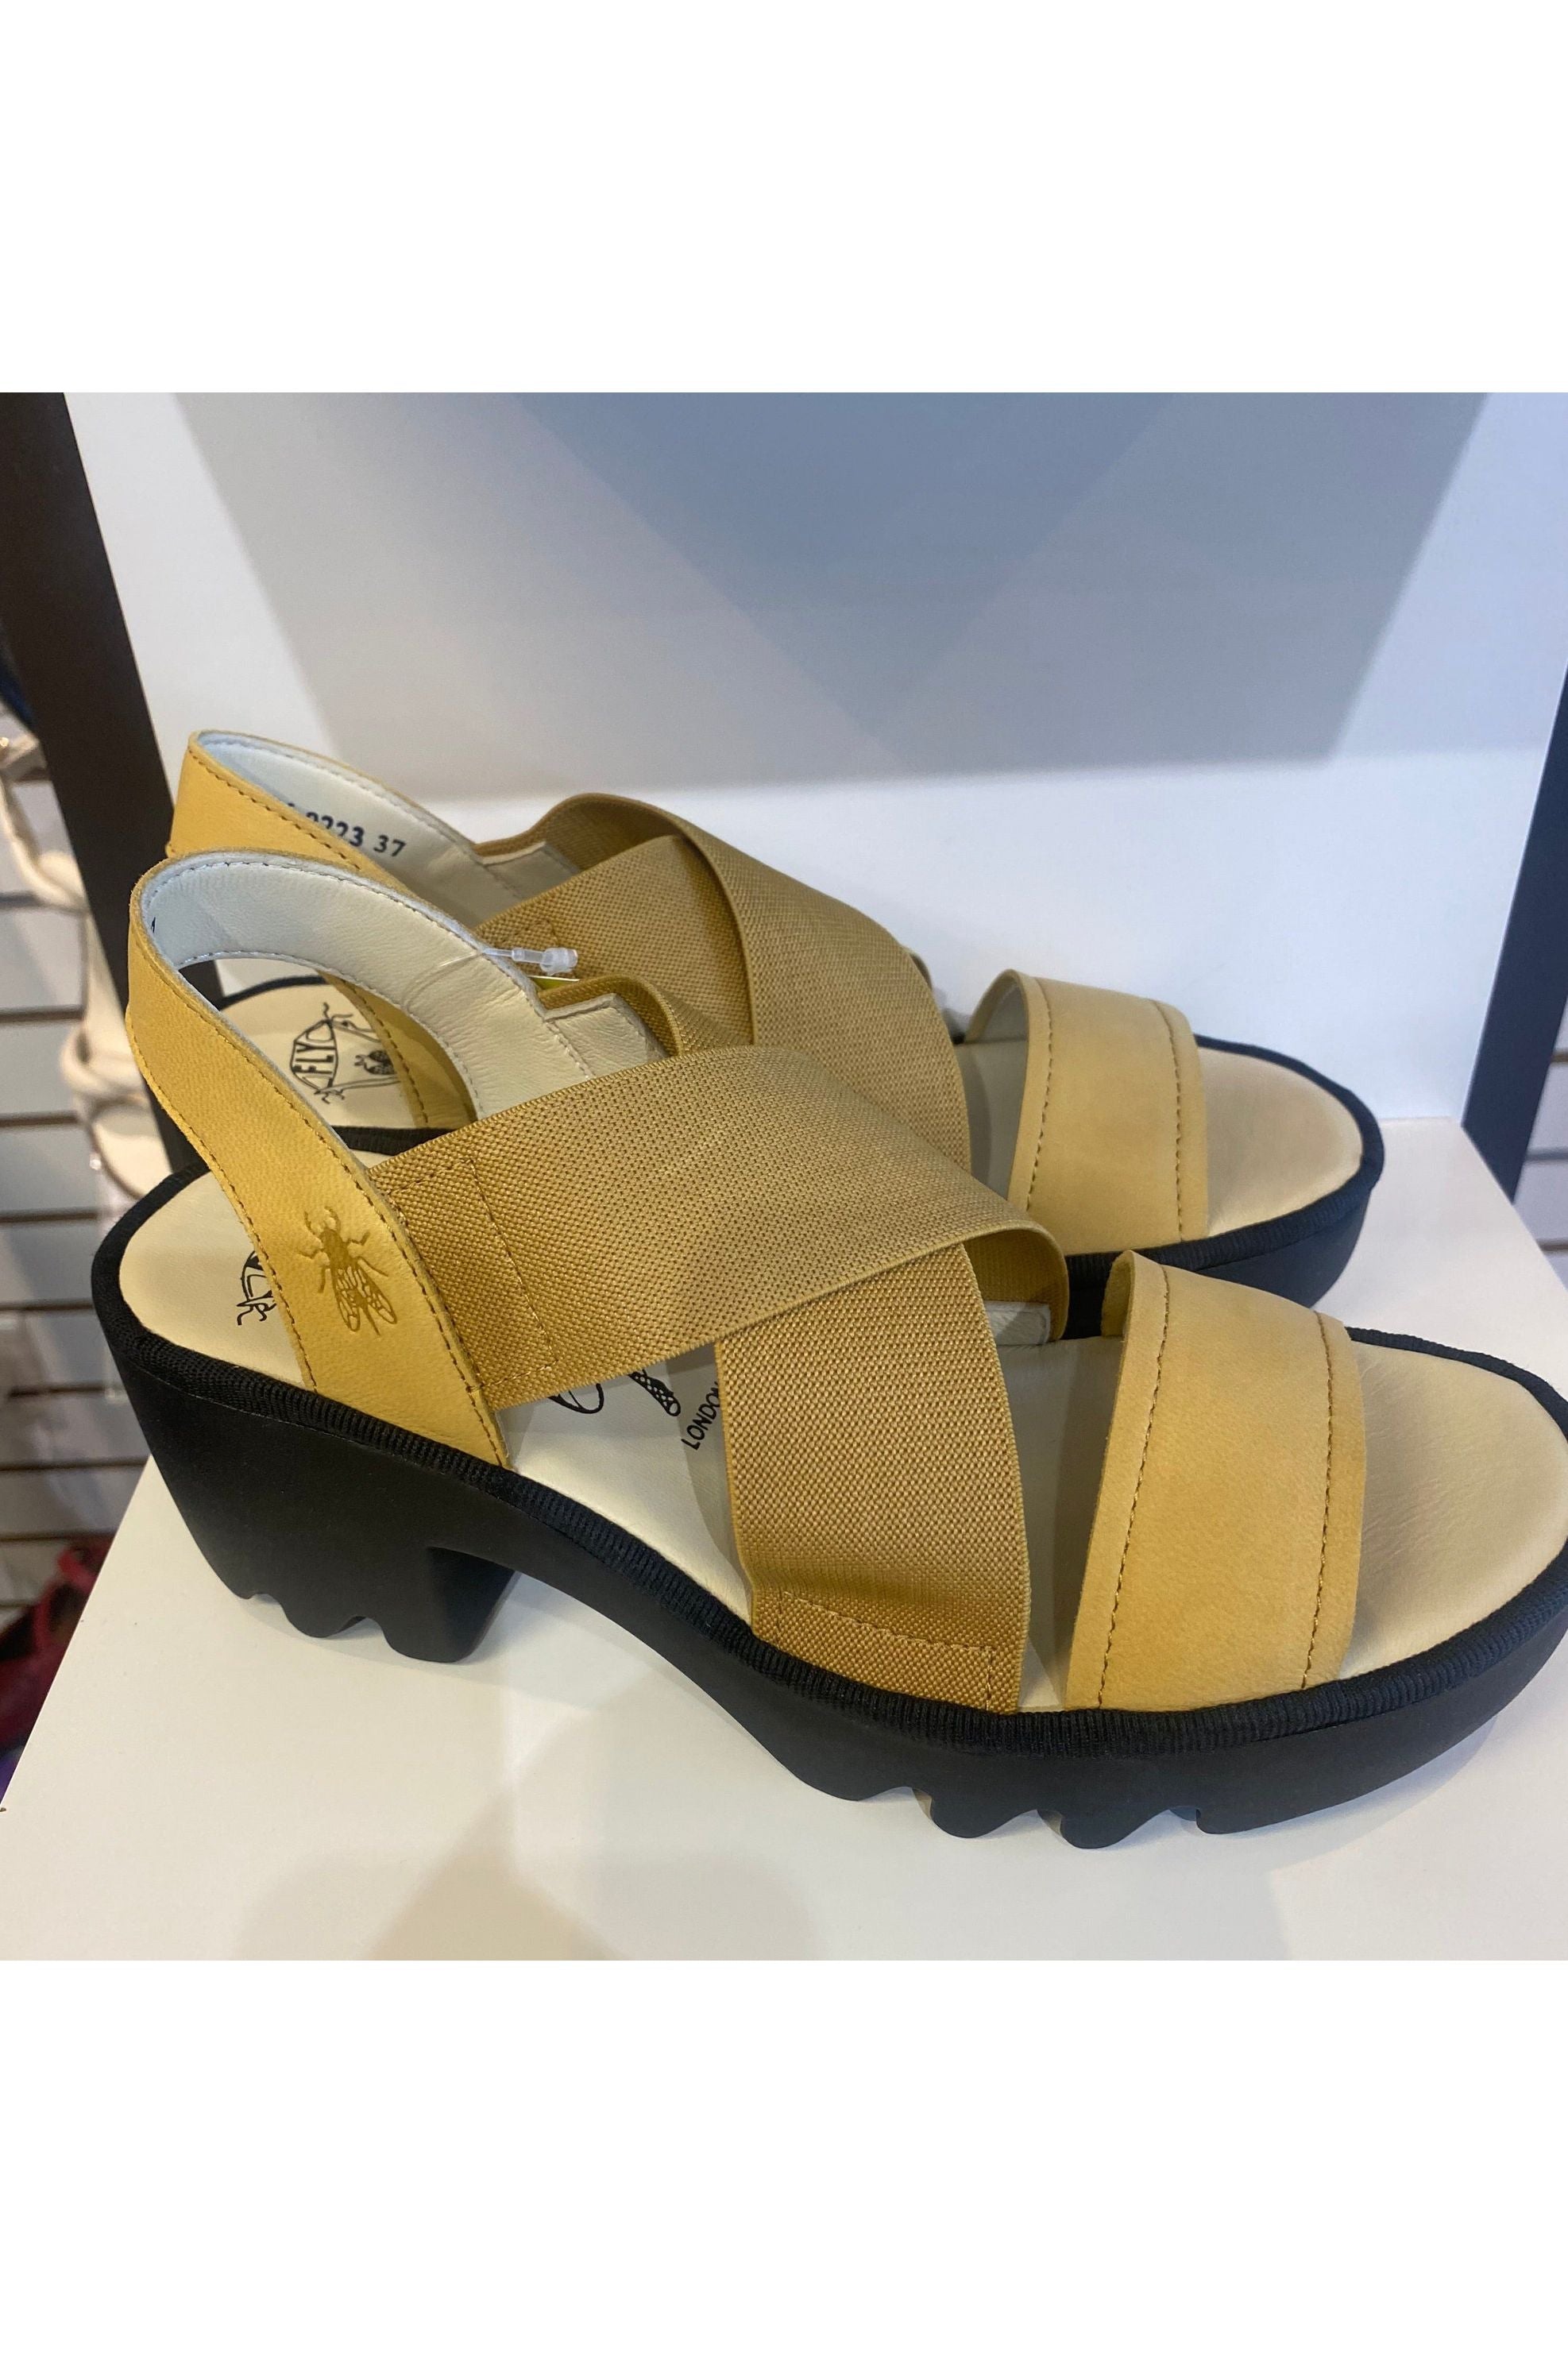 Fly London Elastic and Leather Sandal - Style TAJI, pair2, bumblee yellow